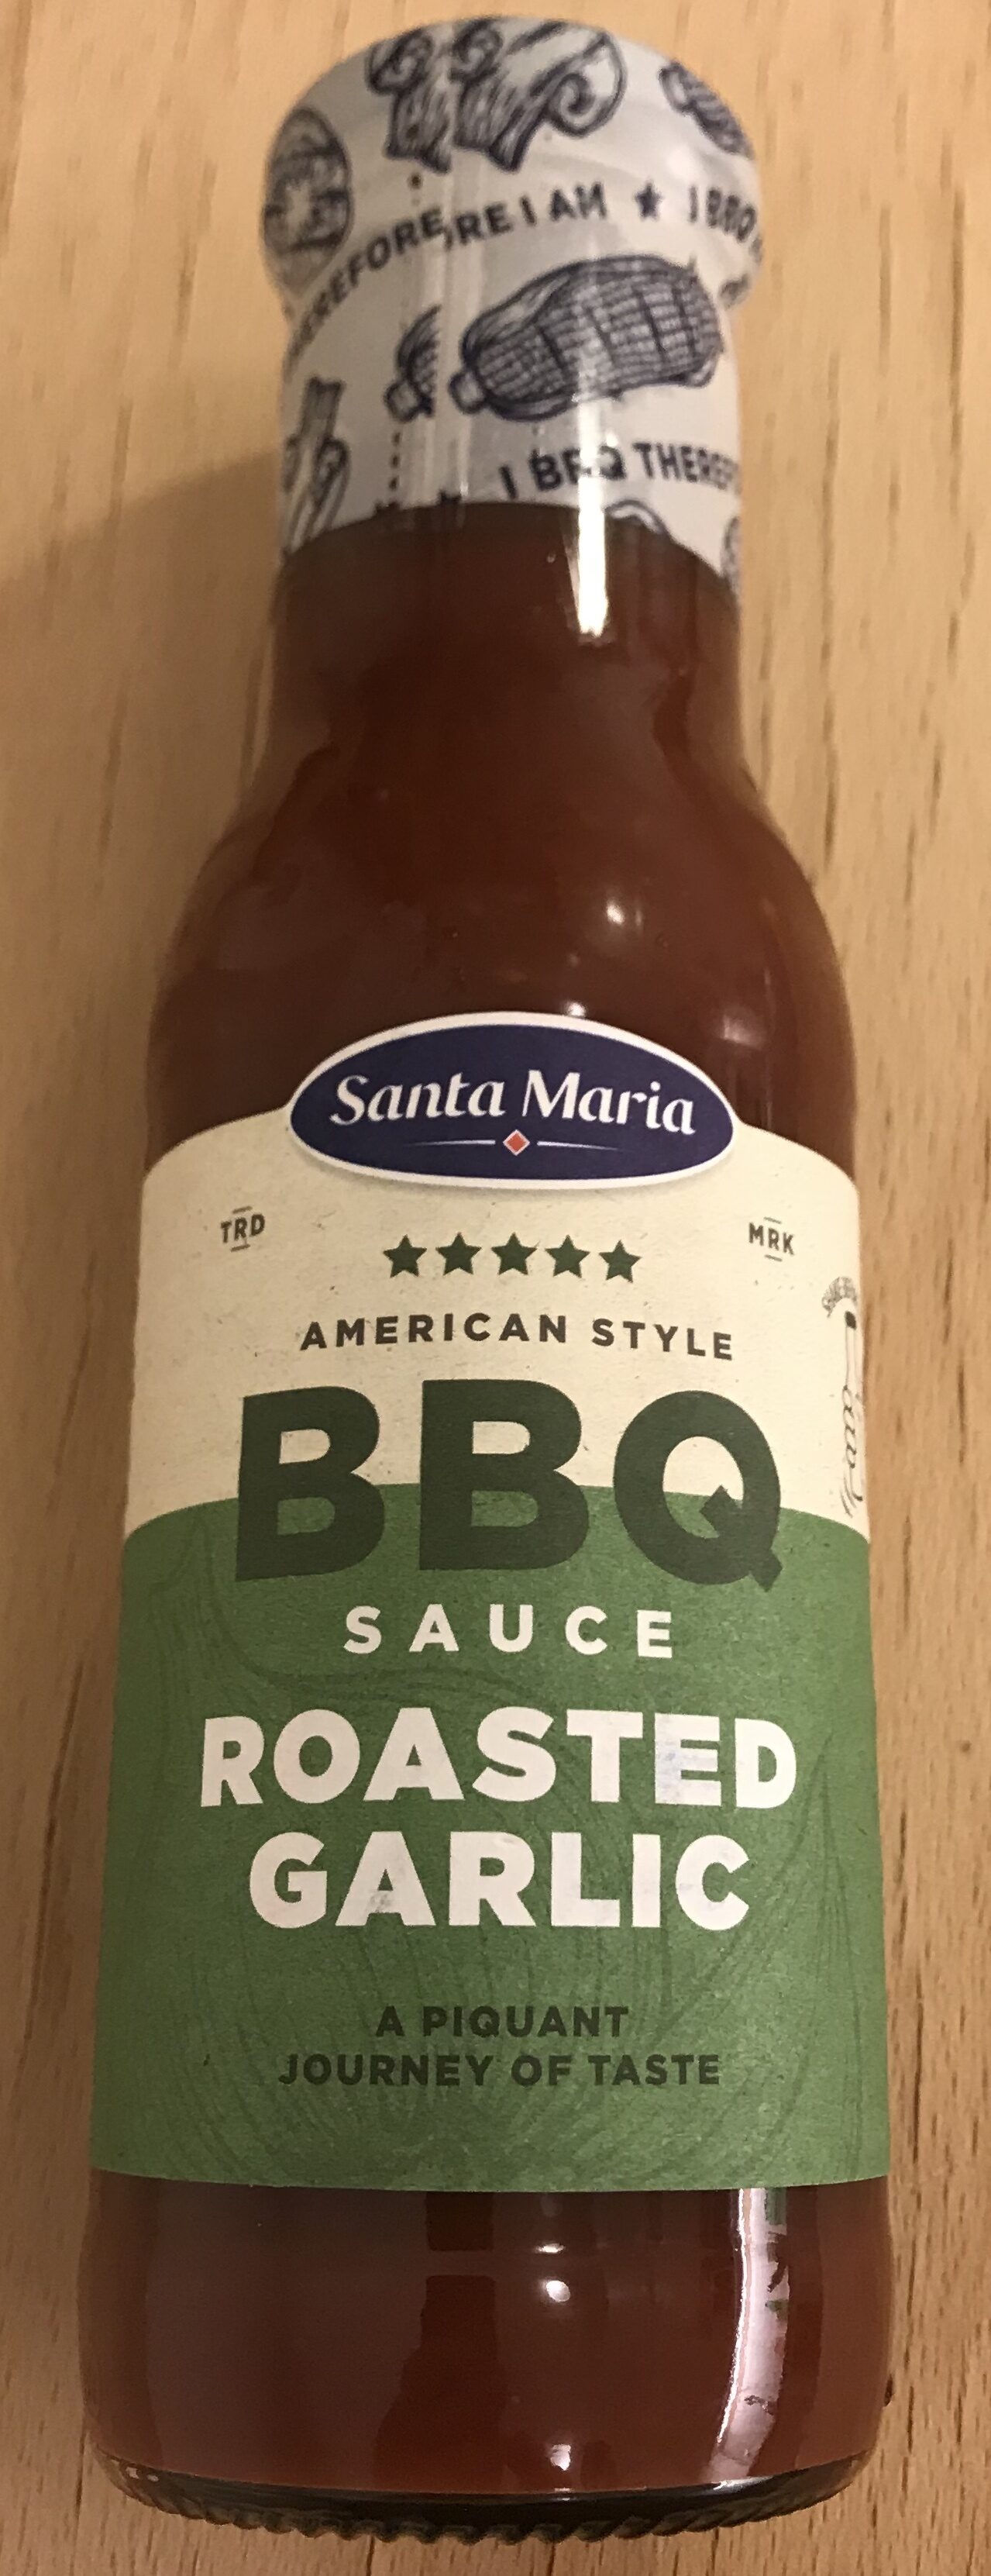 American style BBQ sauce roasted garlic - Tuote - sv